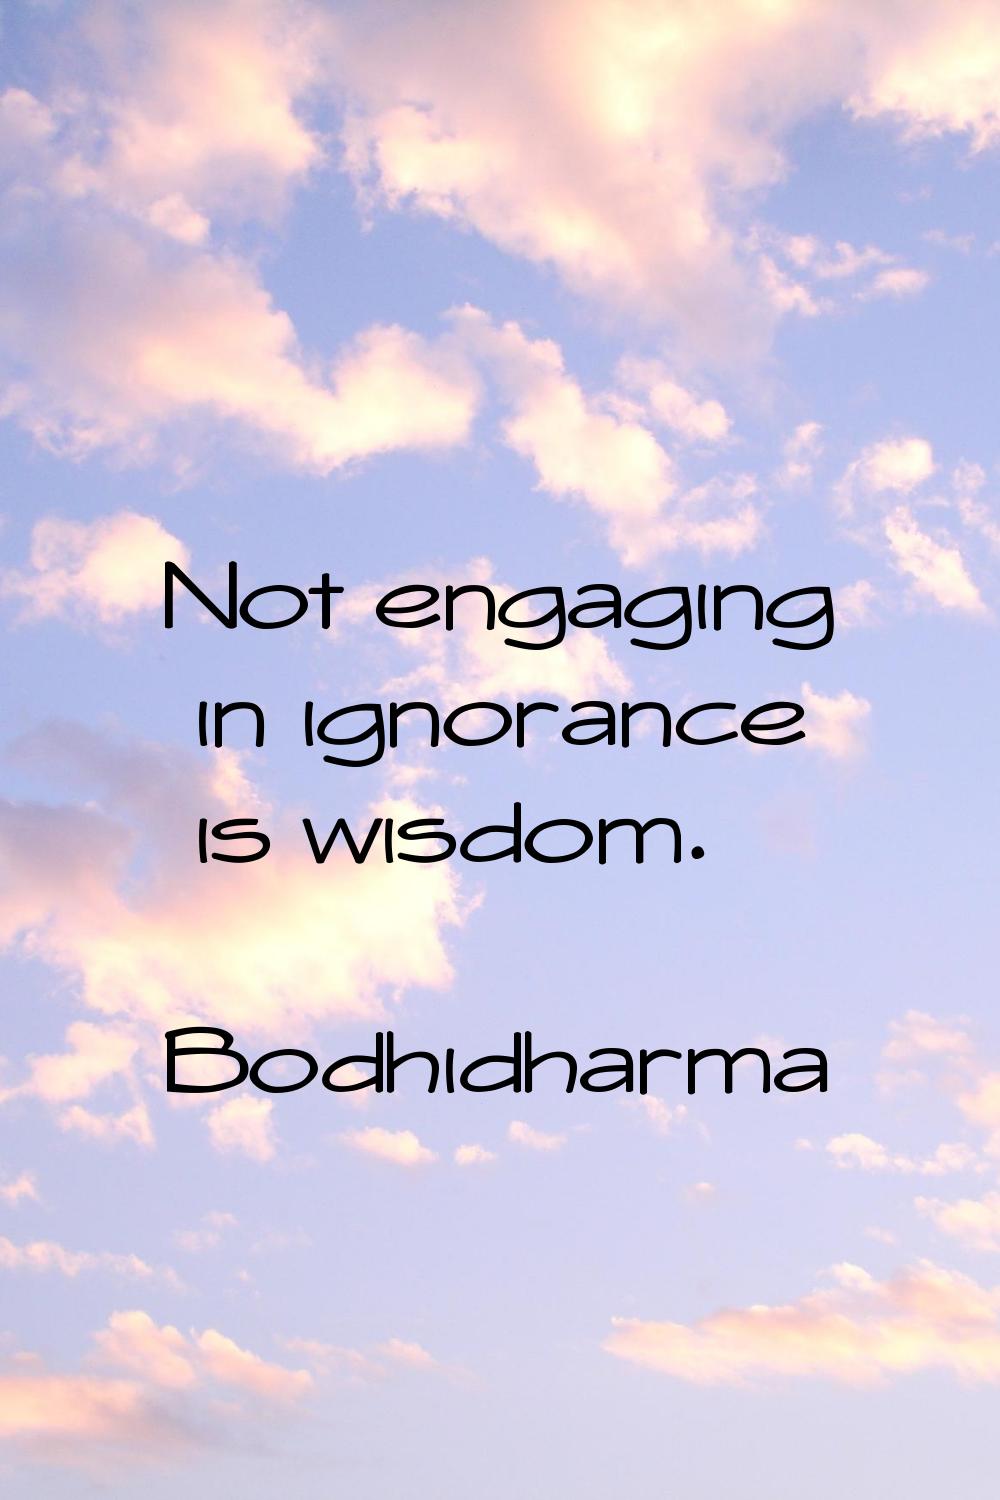 Not engaging in ignorance is wisdom.